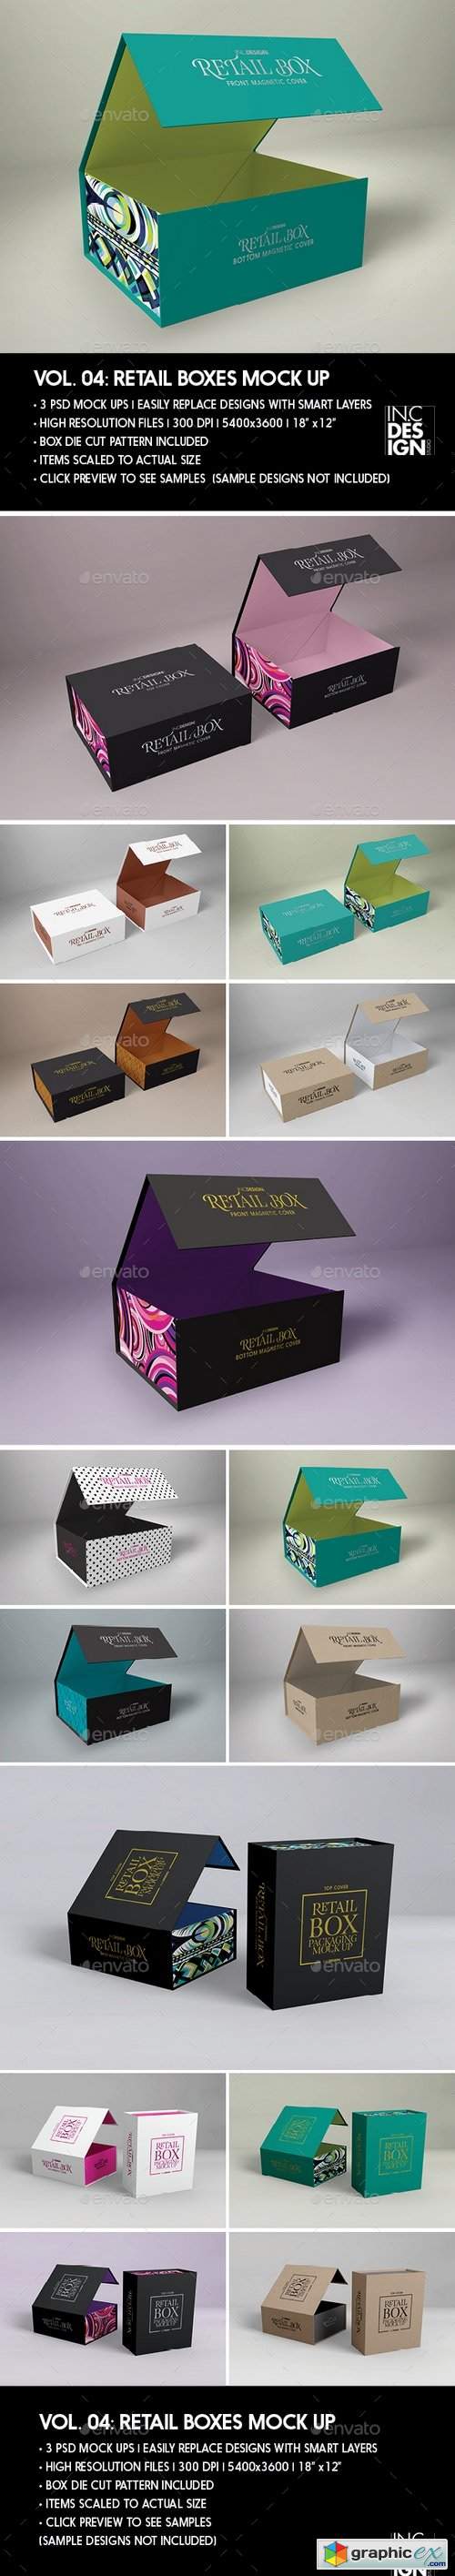 Retail Boxes Vol.4: Magnetic Box Packaging Mock Ups